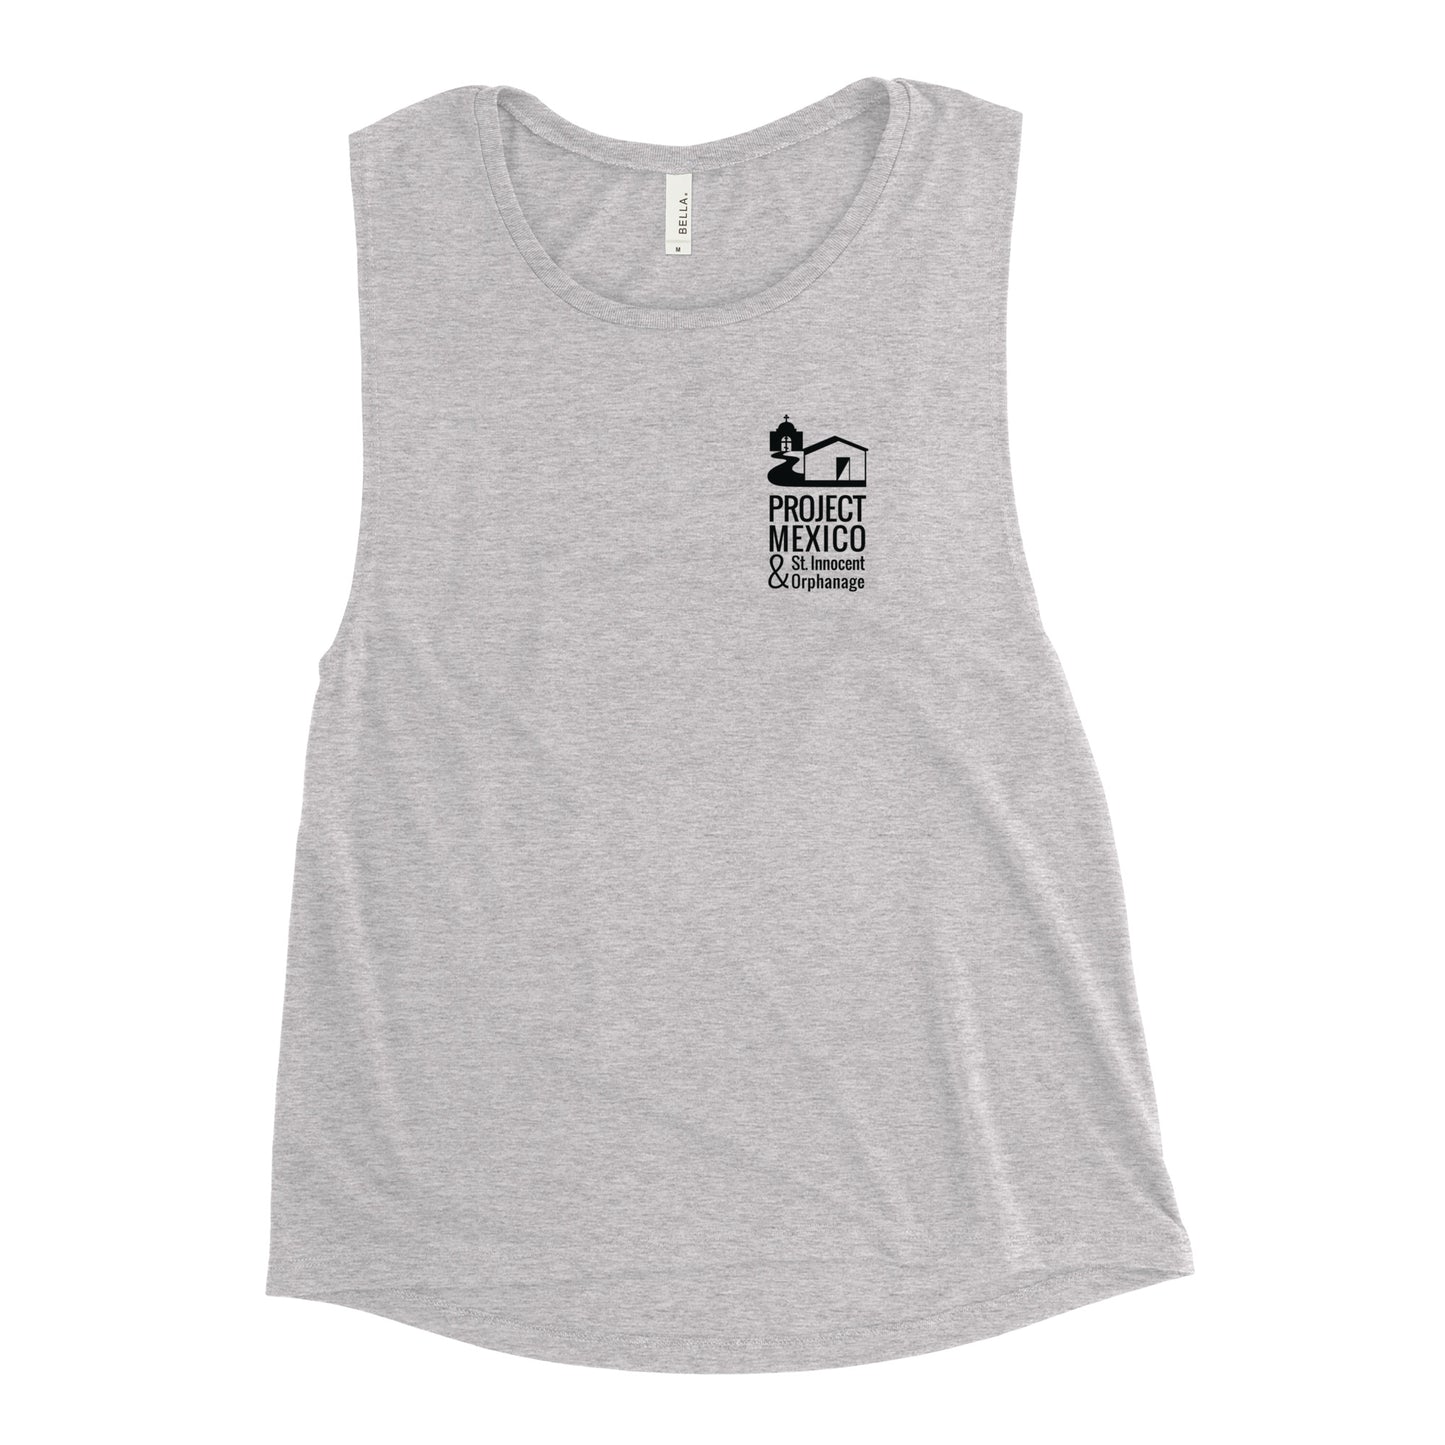 Project Mexico Ladies’ Muscle Tank